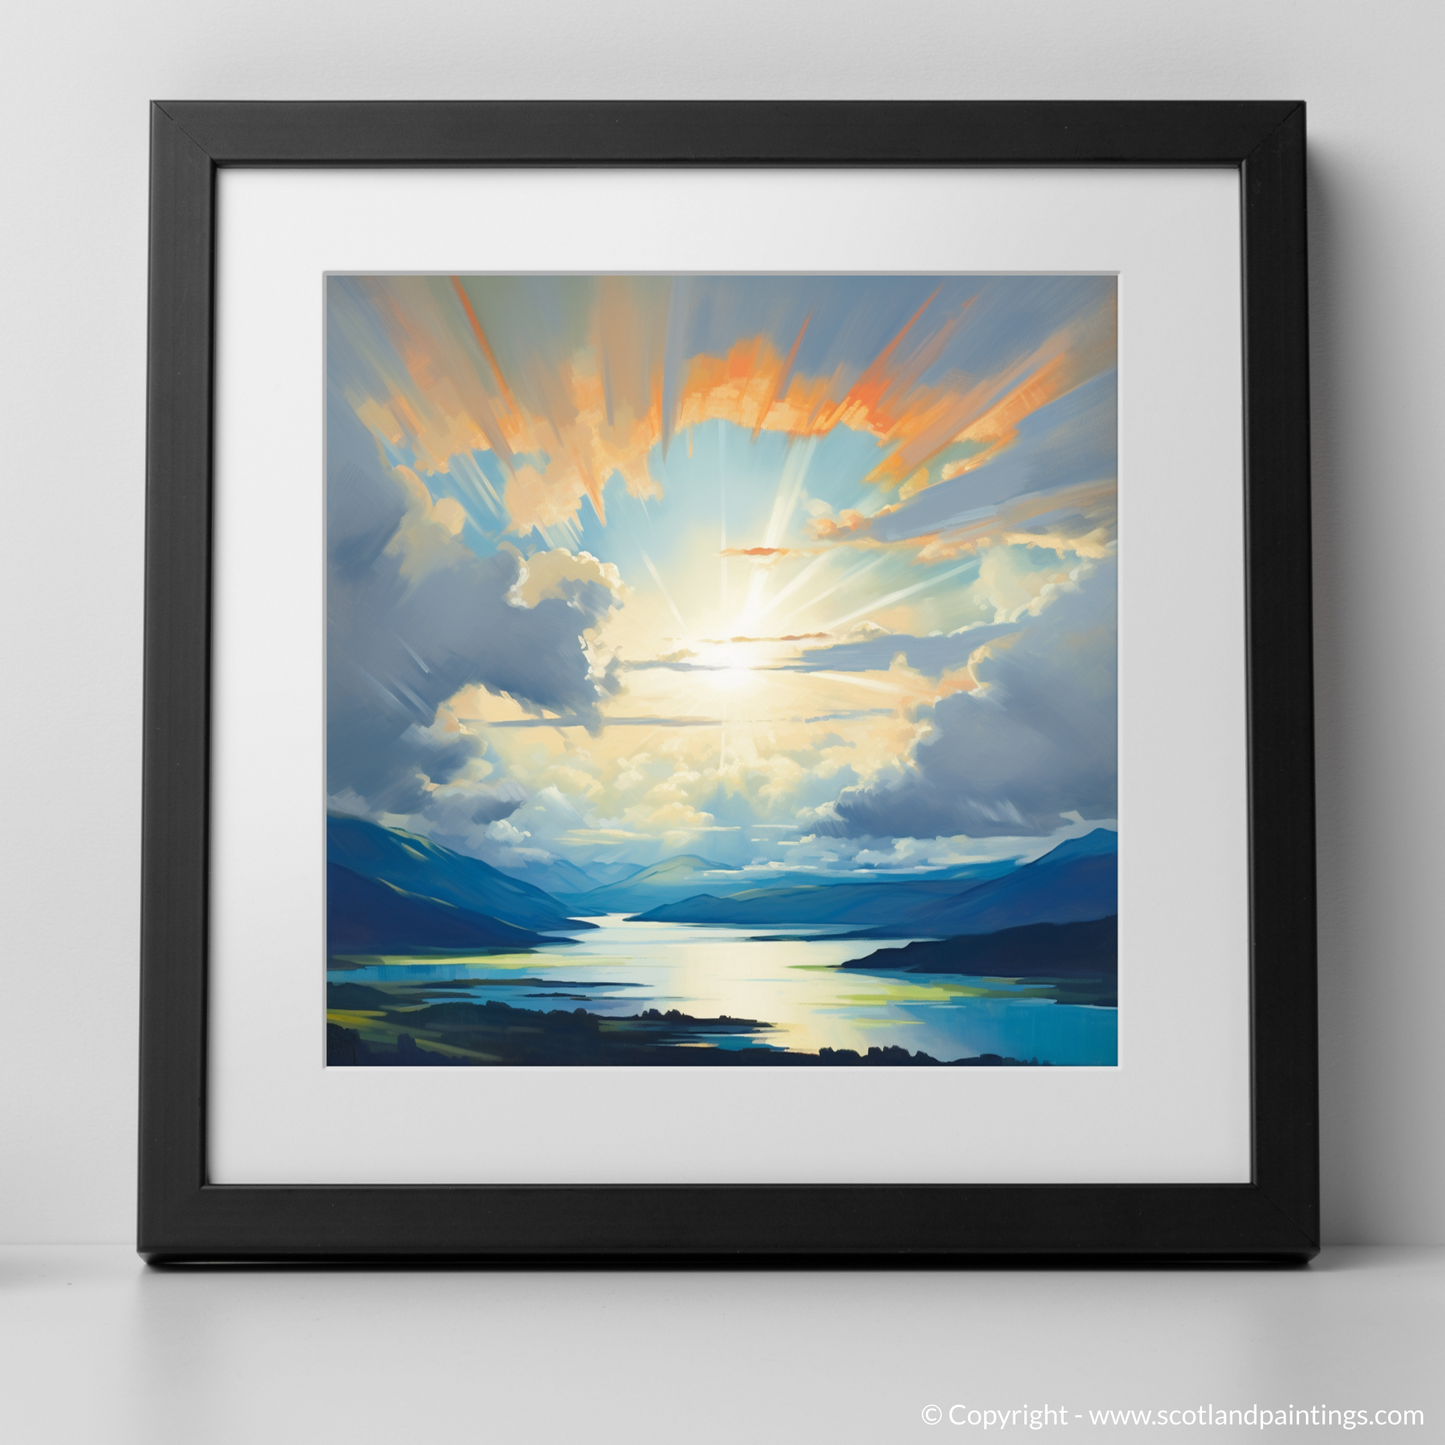 Art Print of Sun rays through clouds above Loch Lomond with a black frame